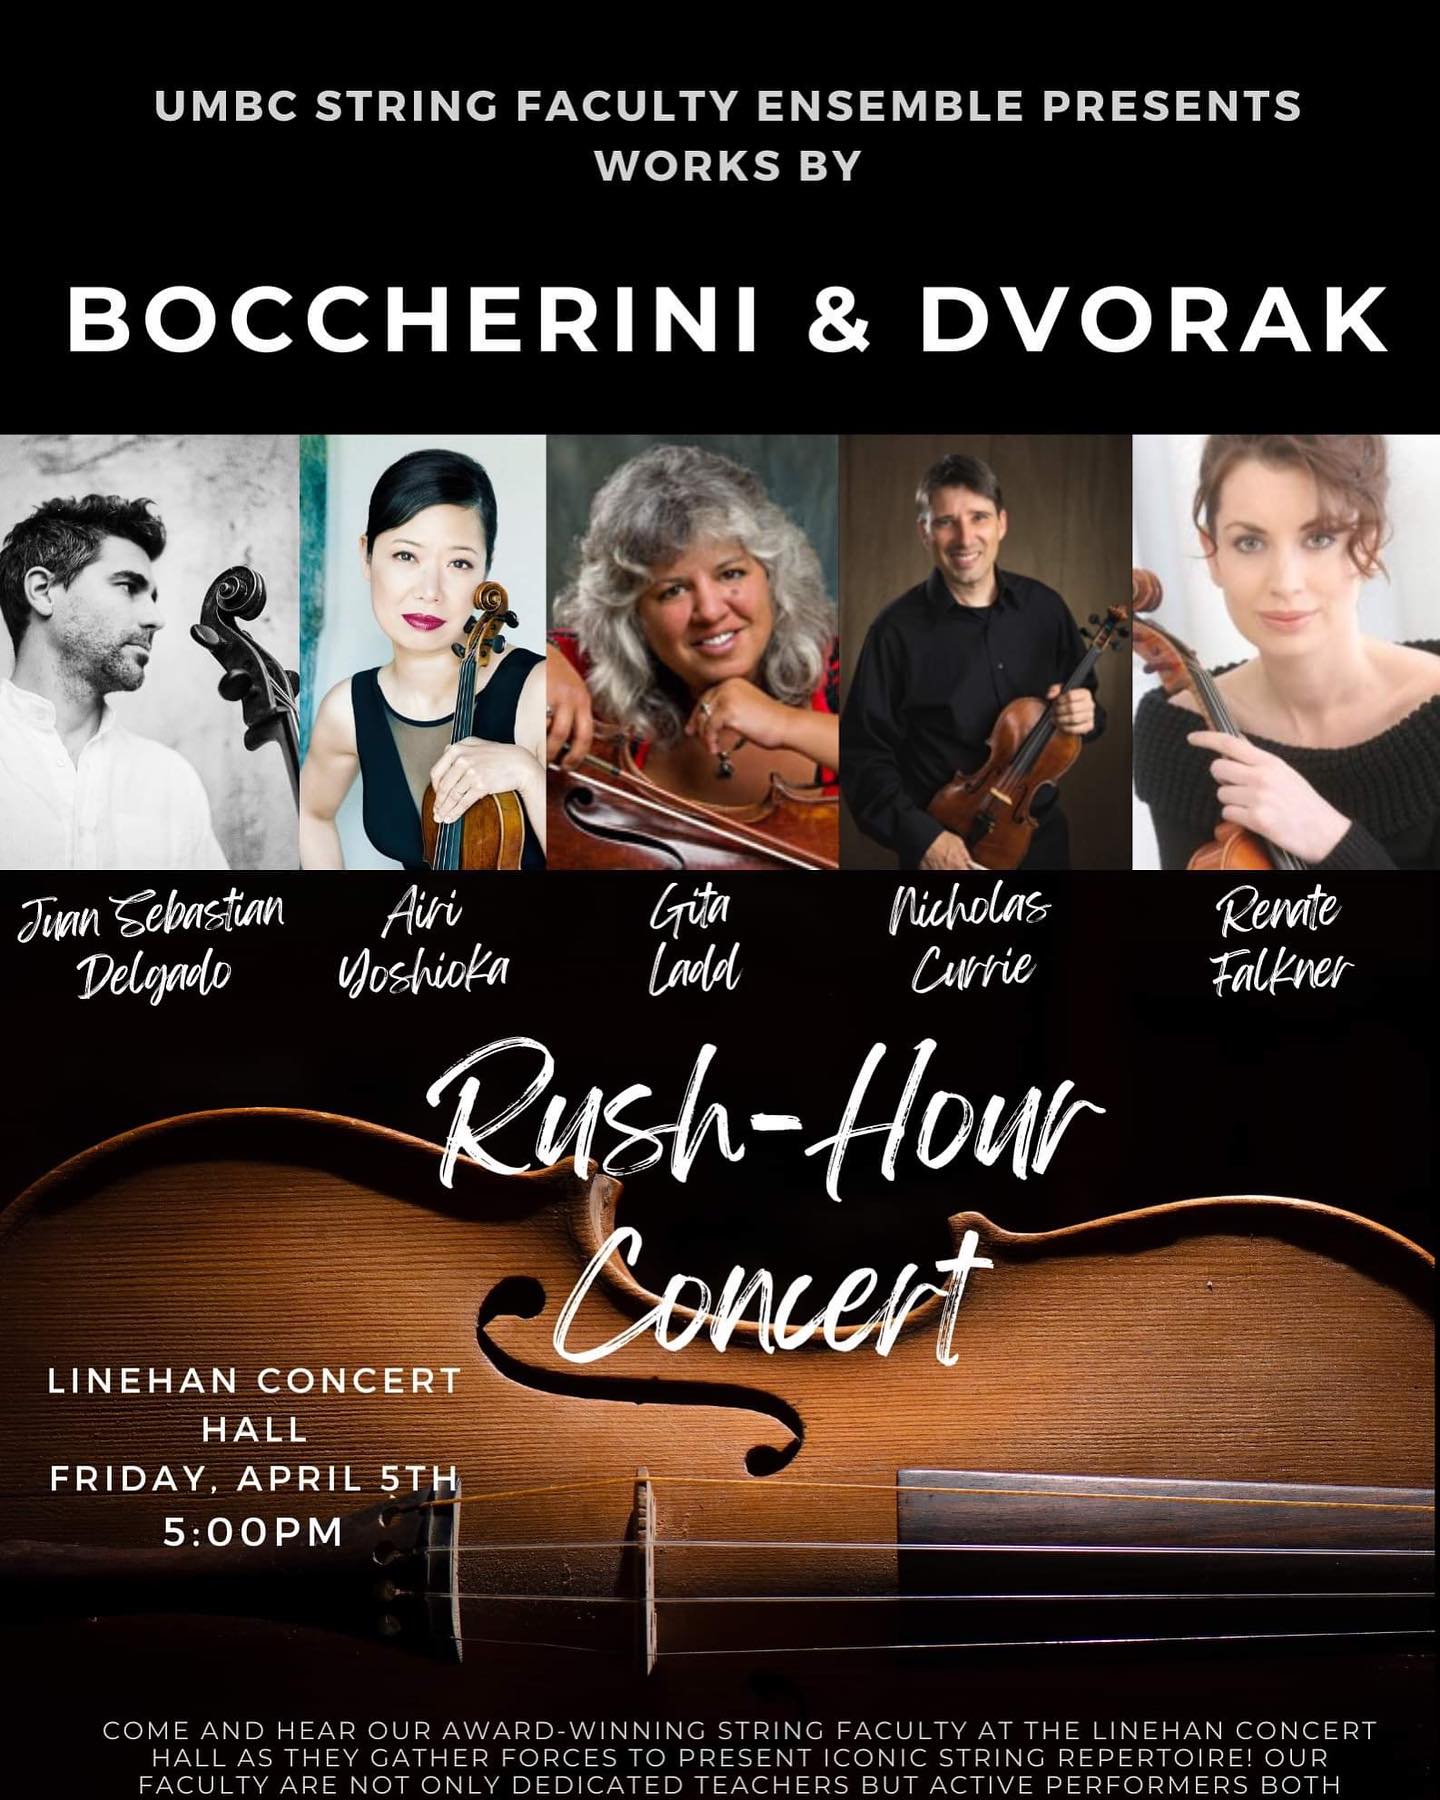 A poster says Boccherini & Dvorak and show images of musicians with instruments